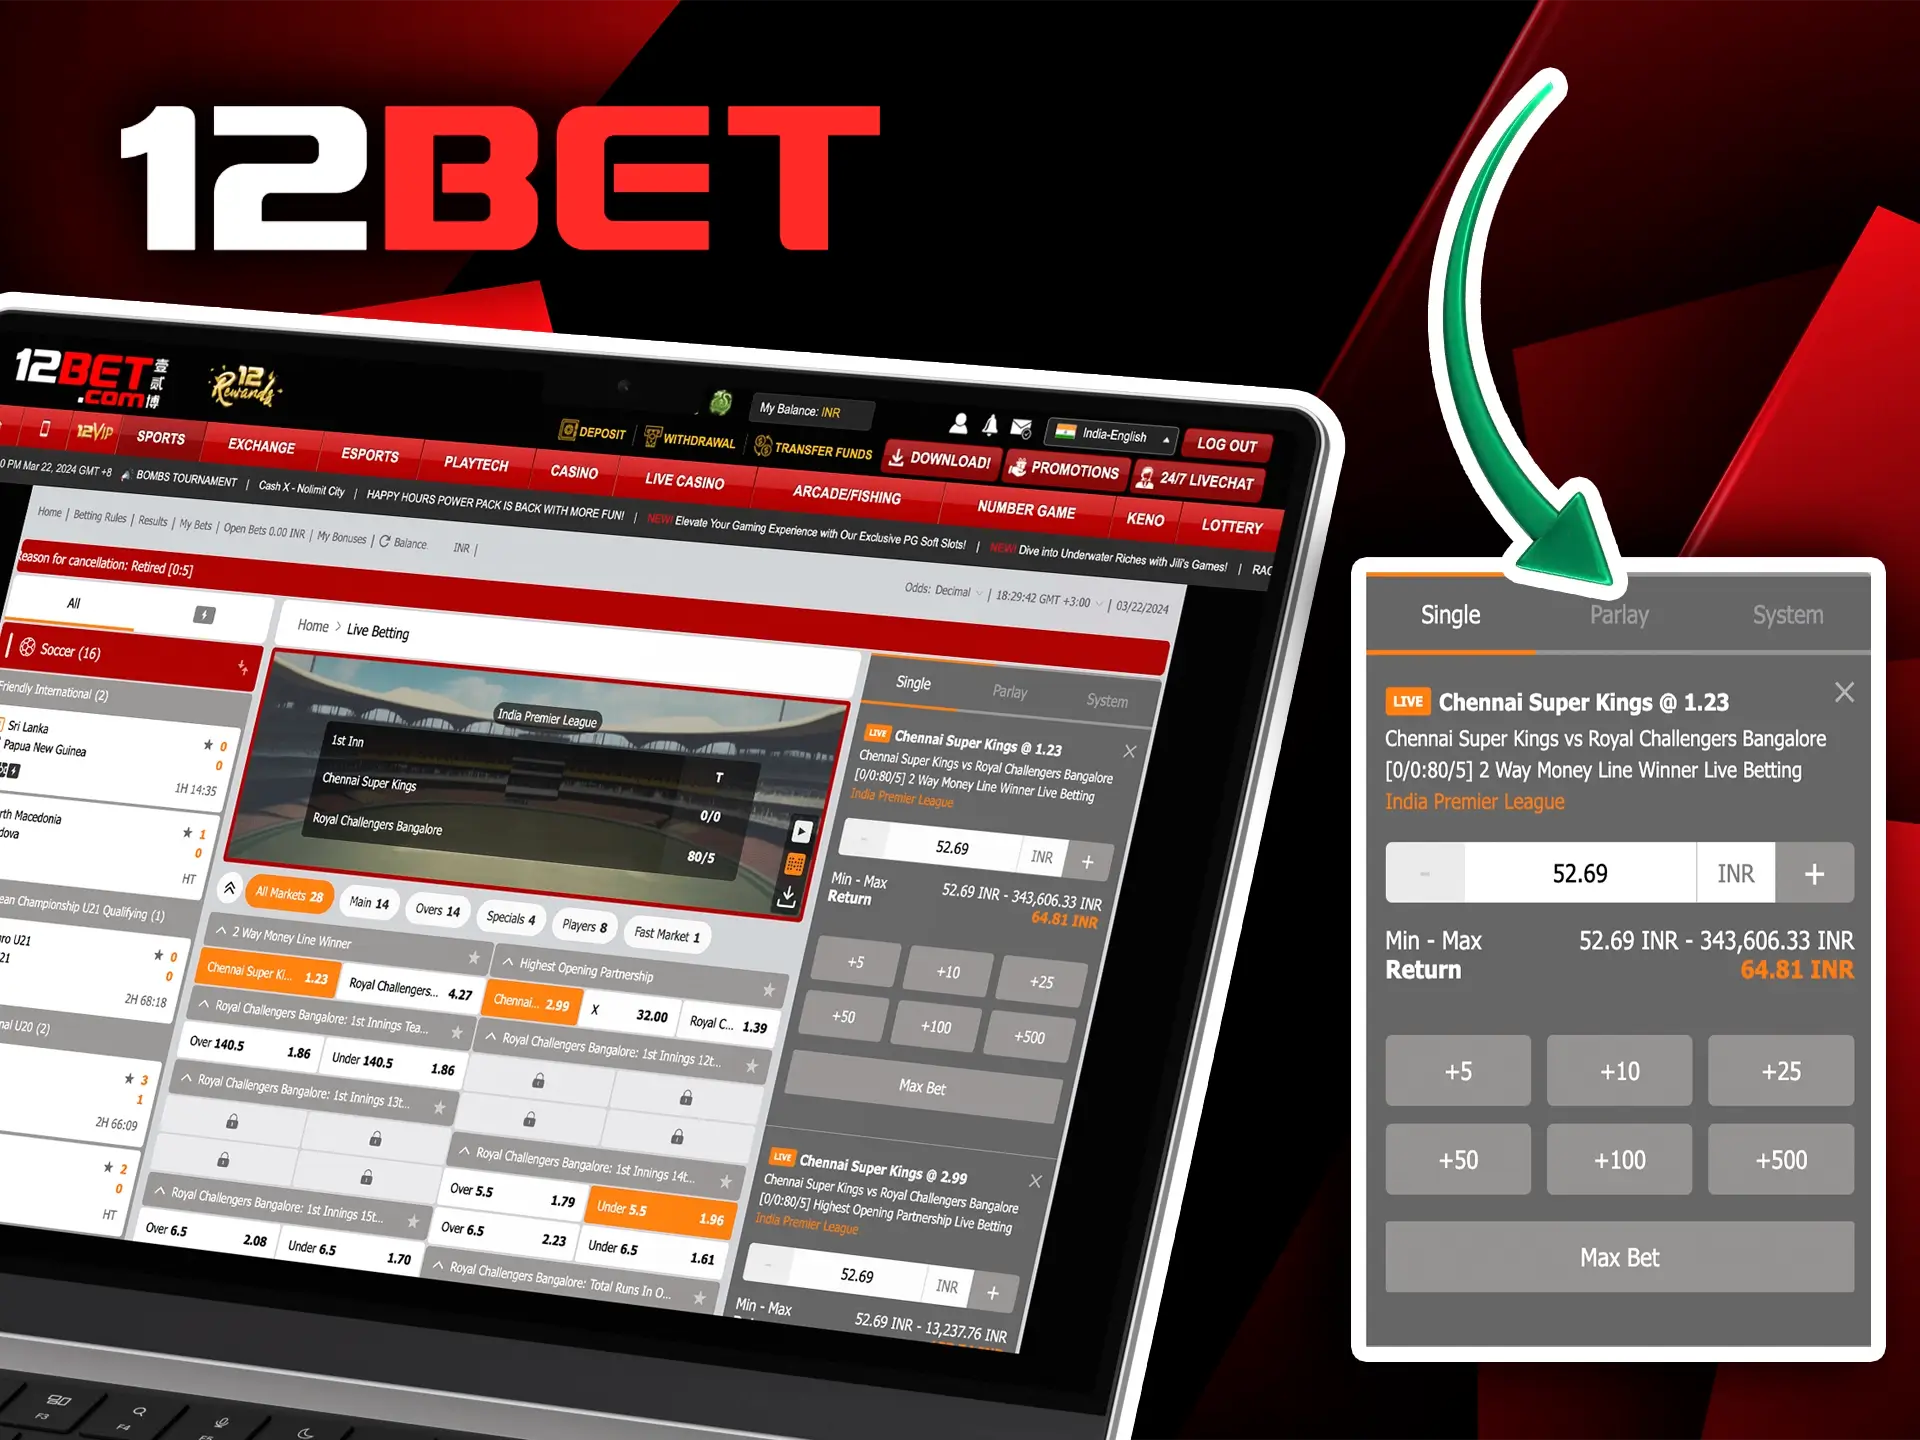 Explore the betting options at 12Bet bookmaker and make your predictions in the best possible way to achieve frequent wins.